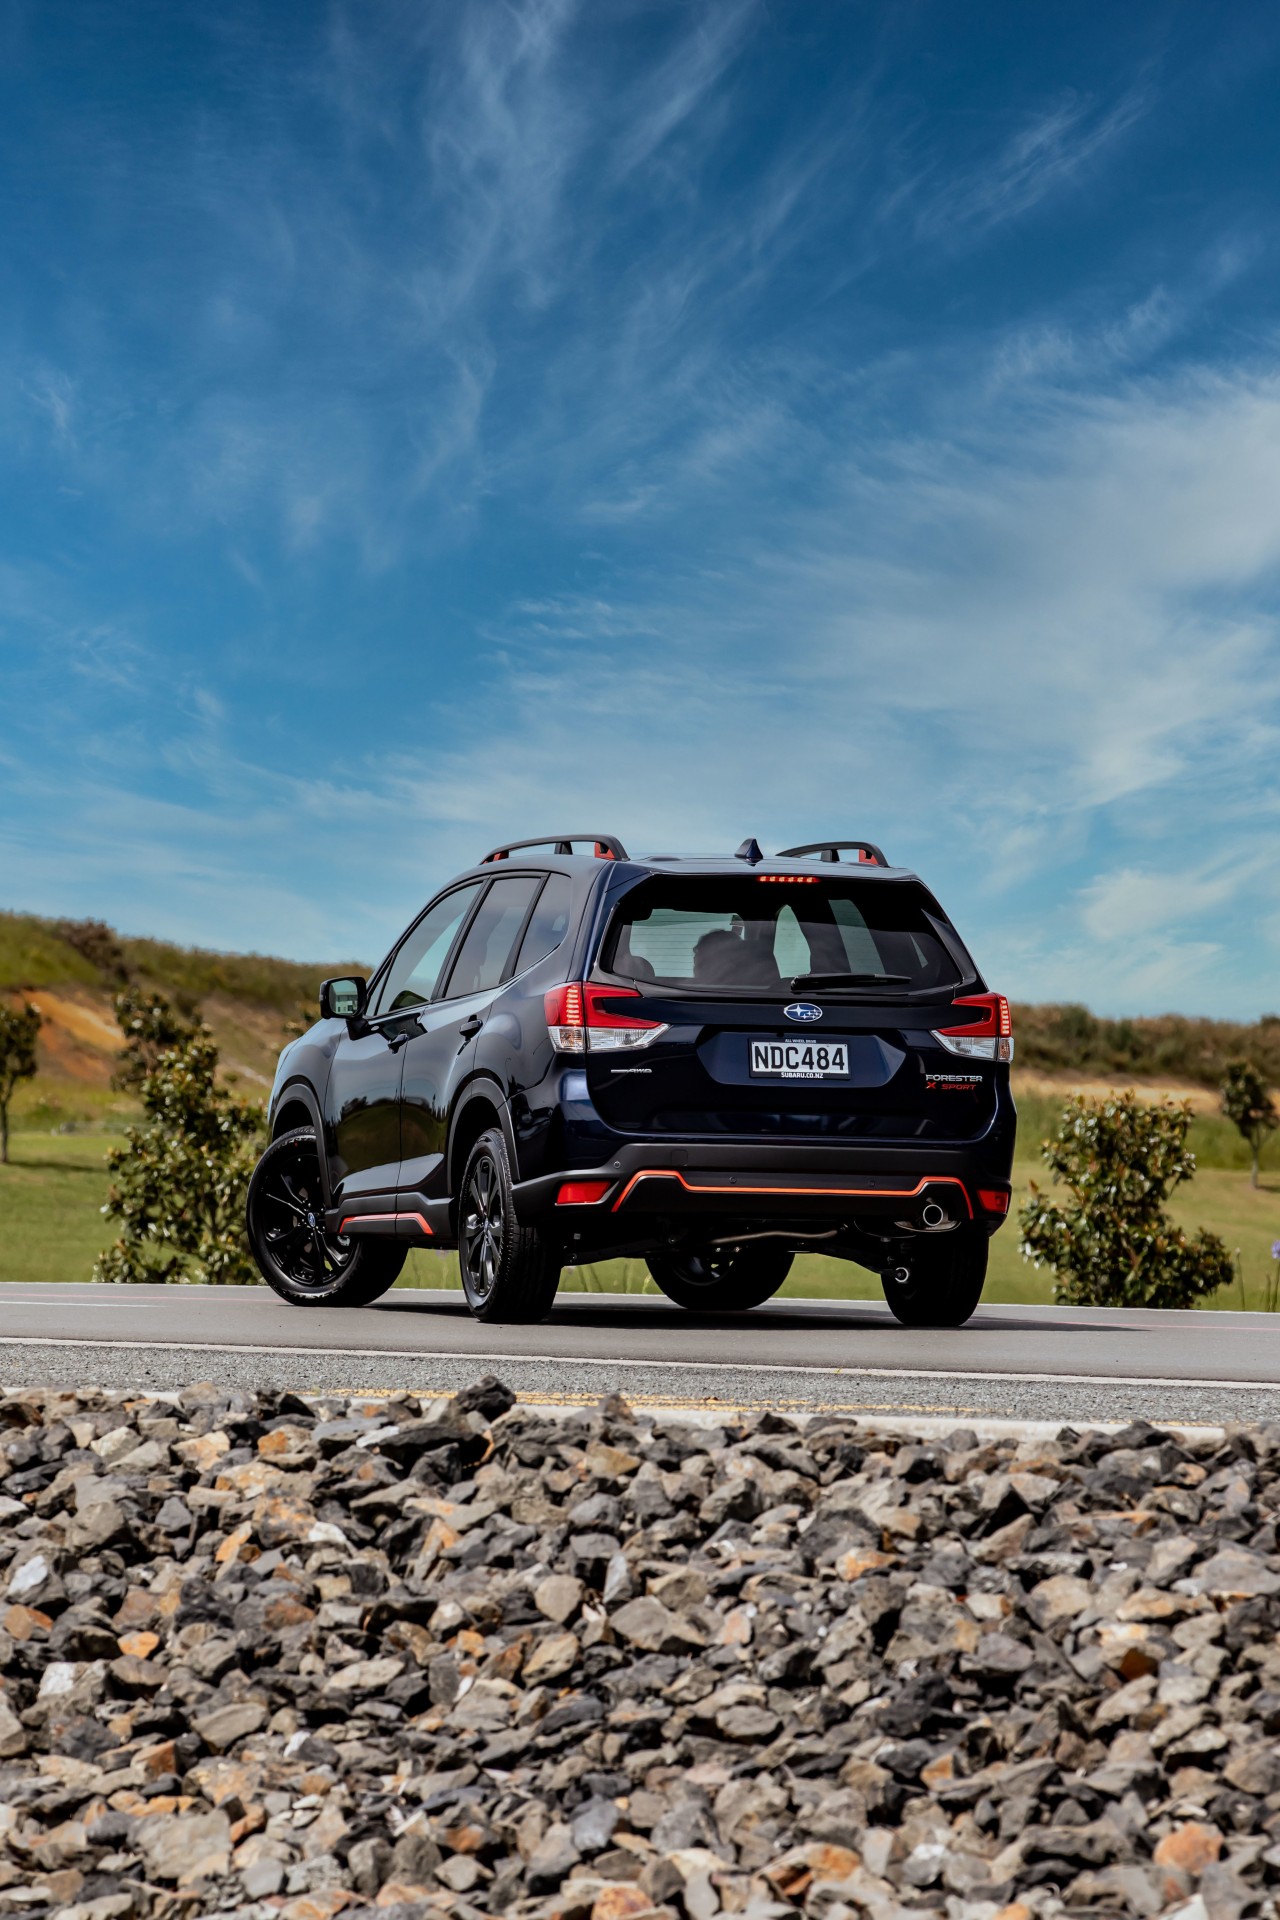 The Forester X Sport can be ordered through your local Authorised Subaru Centre for a value-packed RRP of $47,490, with vehicles available in early 2021.